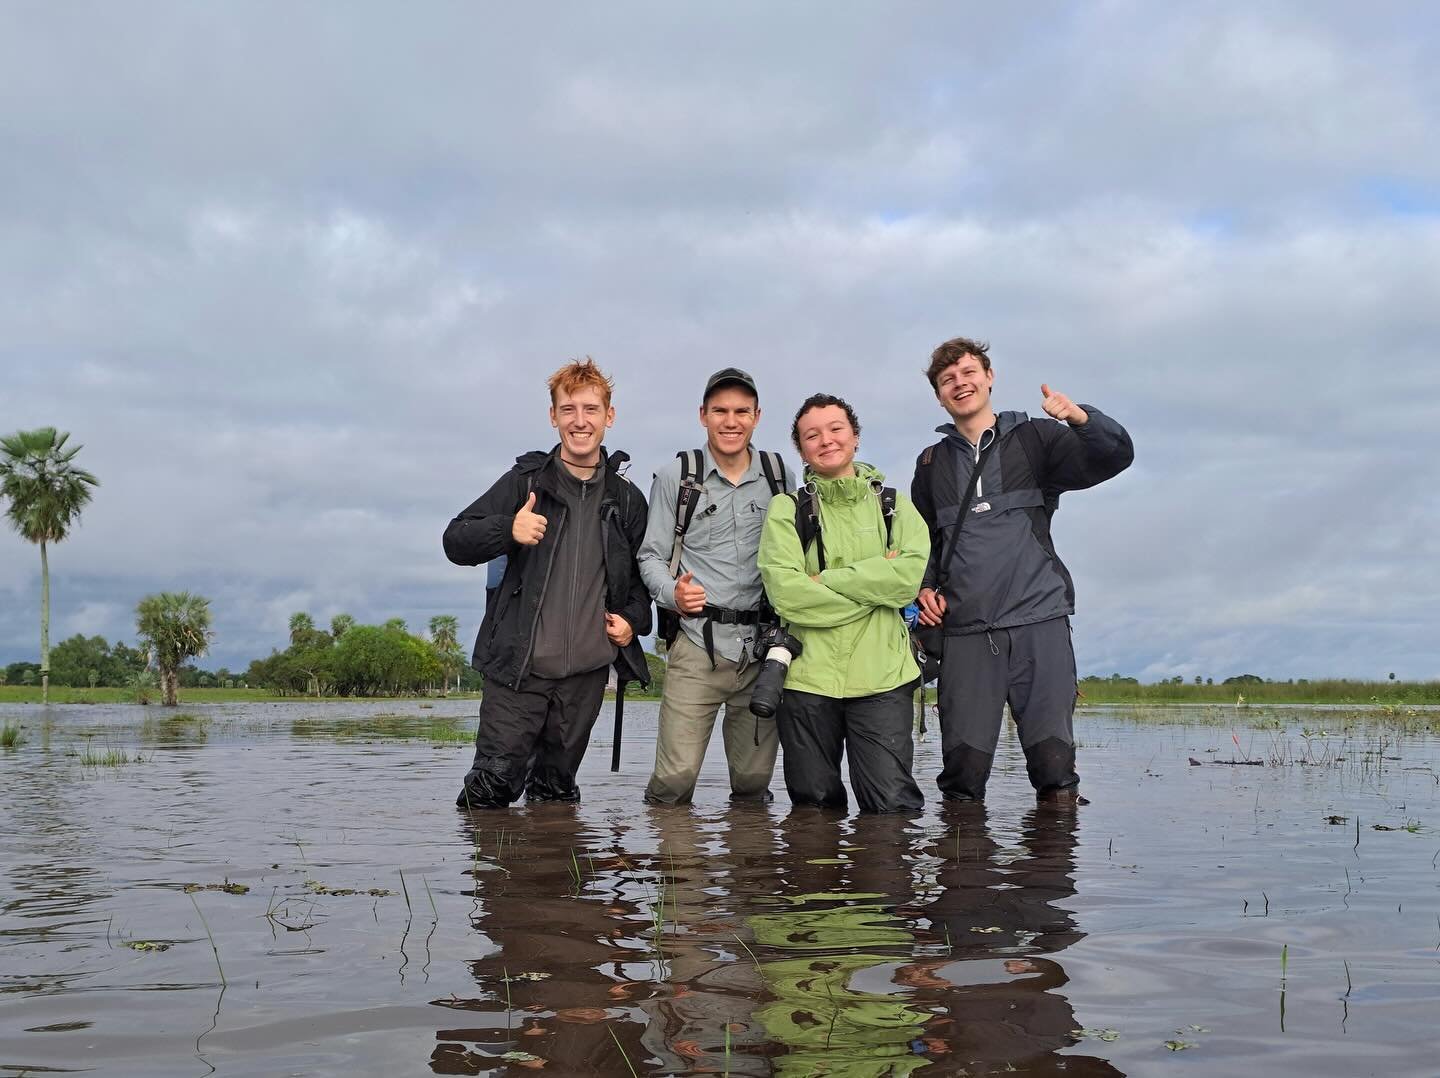 This #FieldworkFriday we&rsquo;d like to invite you to our new course, Fieldwork 101: How to work in the wetlands of &Ntilde;eembuc&uacute;! 🤓📚

After three years of drought, heavy summer rains due to the El Ni&ntilde;o phenomenon have revived &Nti